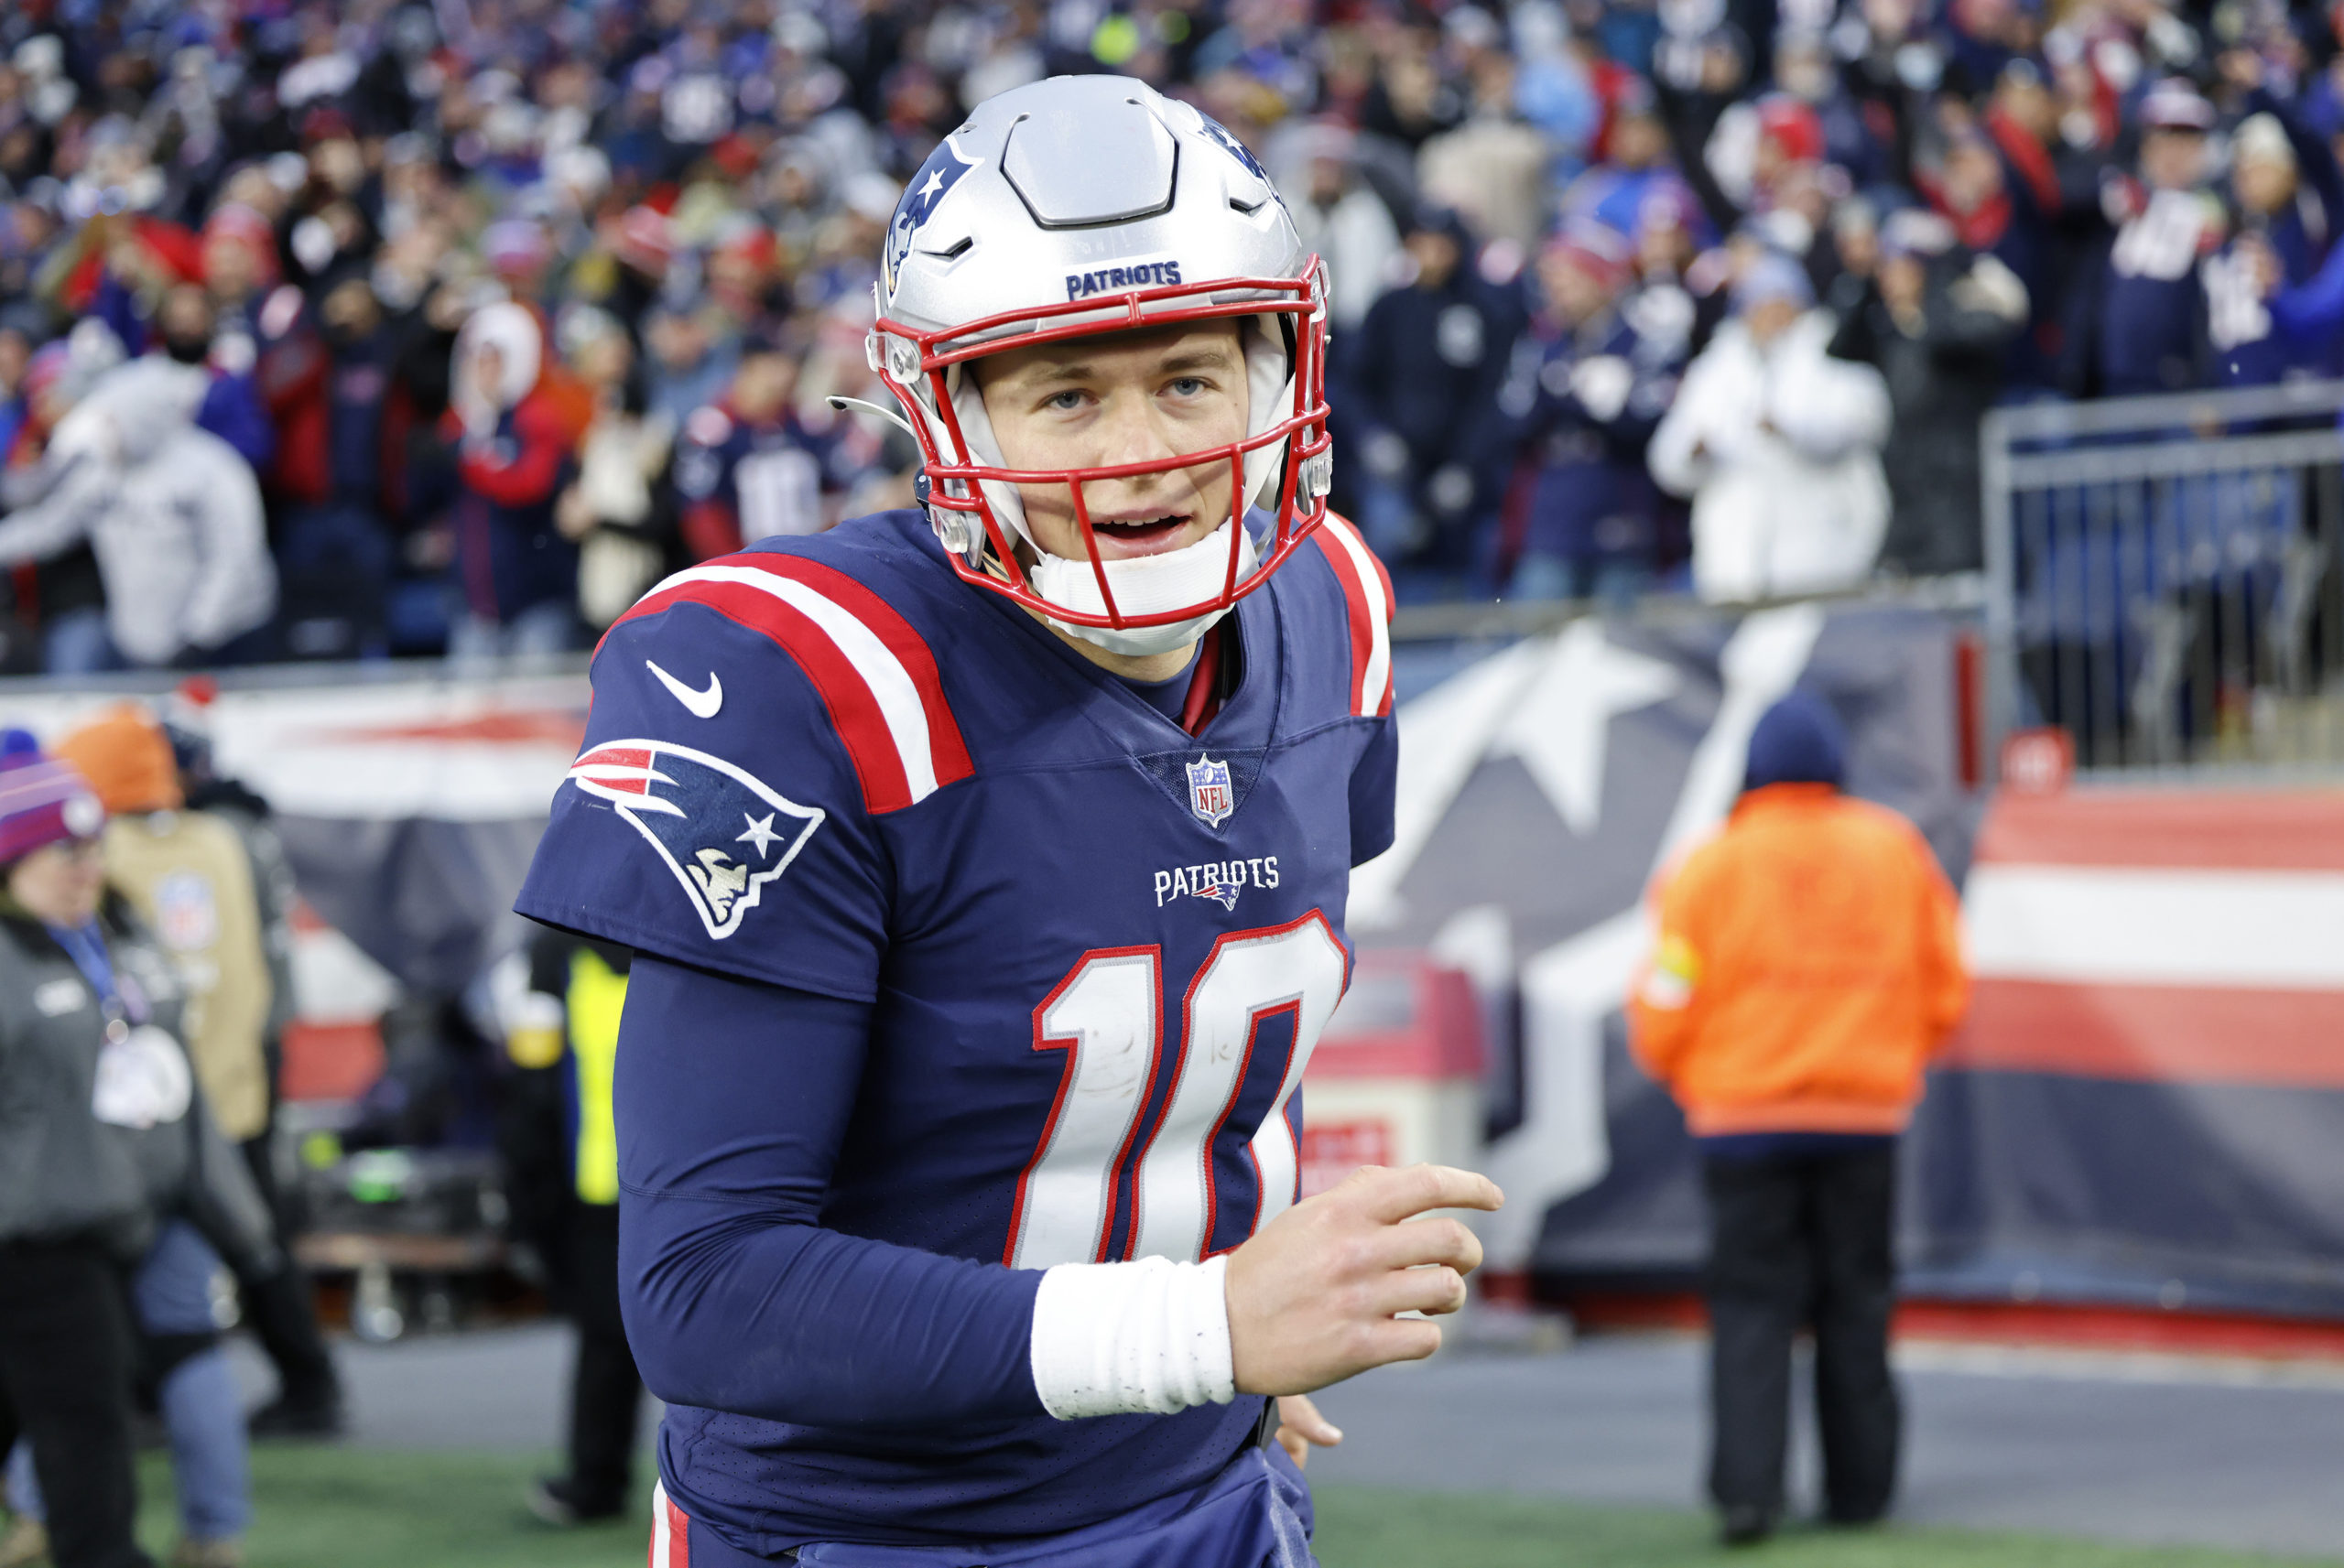 FOXBOROUGH, MA - NOVEMBER 28: New England Patriots quarterback Mac Jones (10) during a game between the New England Patriots and the Tennessee Titans on November 28, 2021, at Gillette Stadium in Foxborough, Massachusetts. (Photo by Fred Kfoury III/Icon Sportswire via Getty Images)